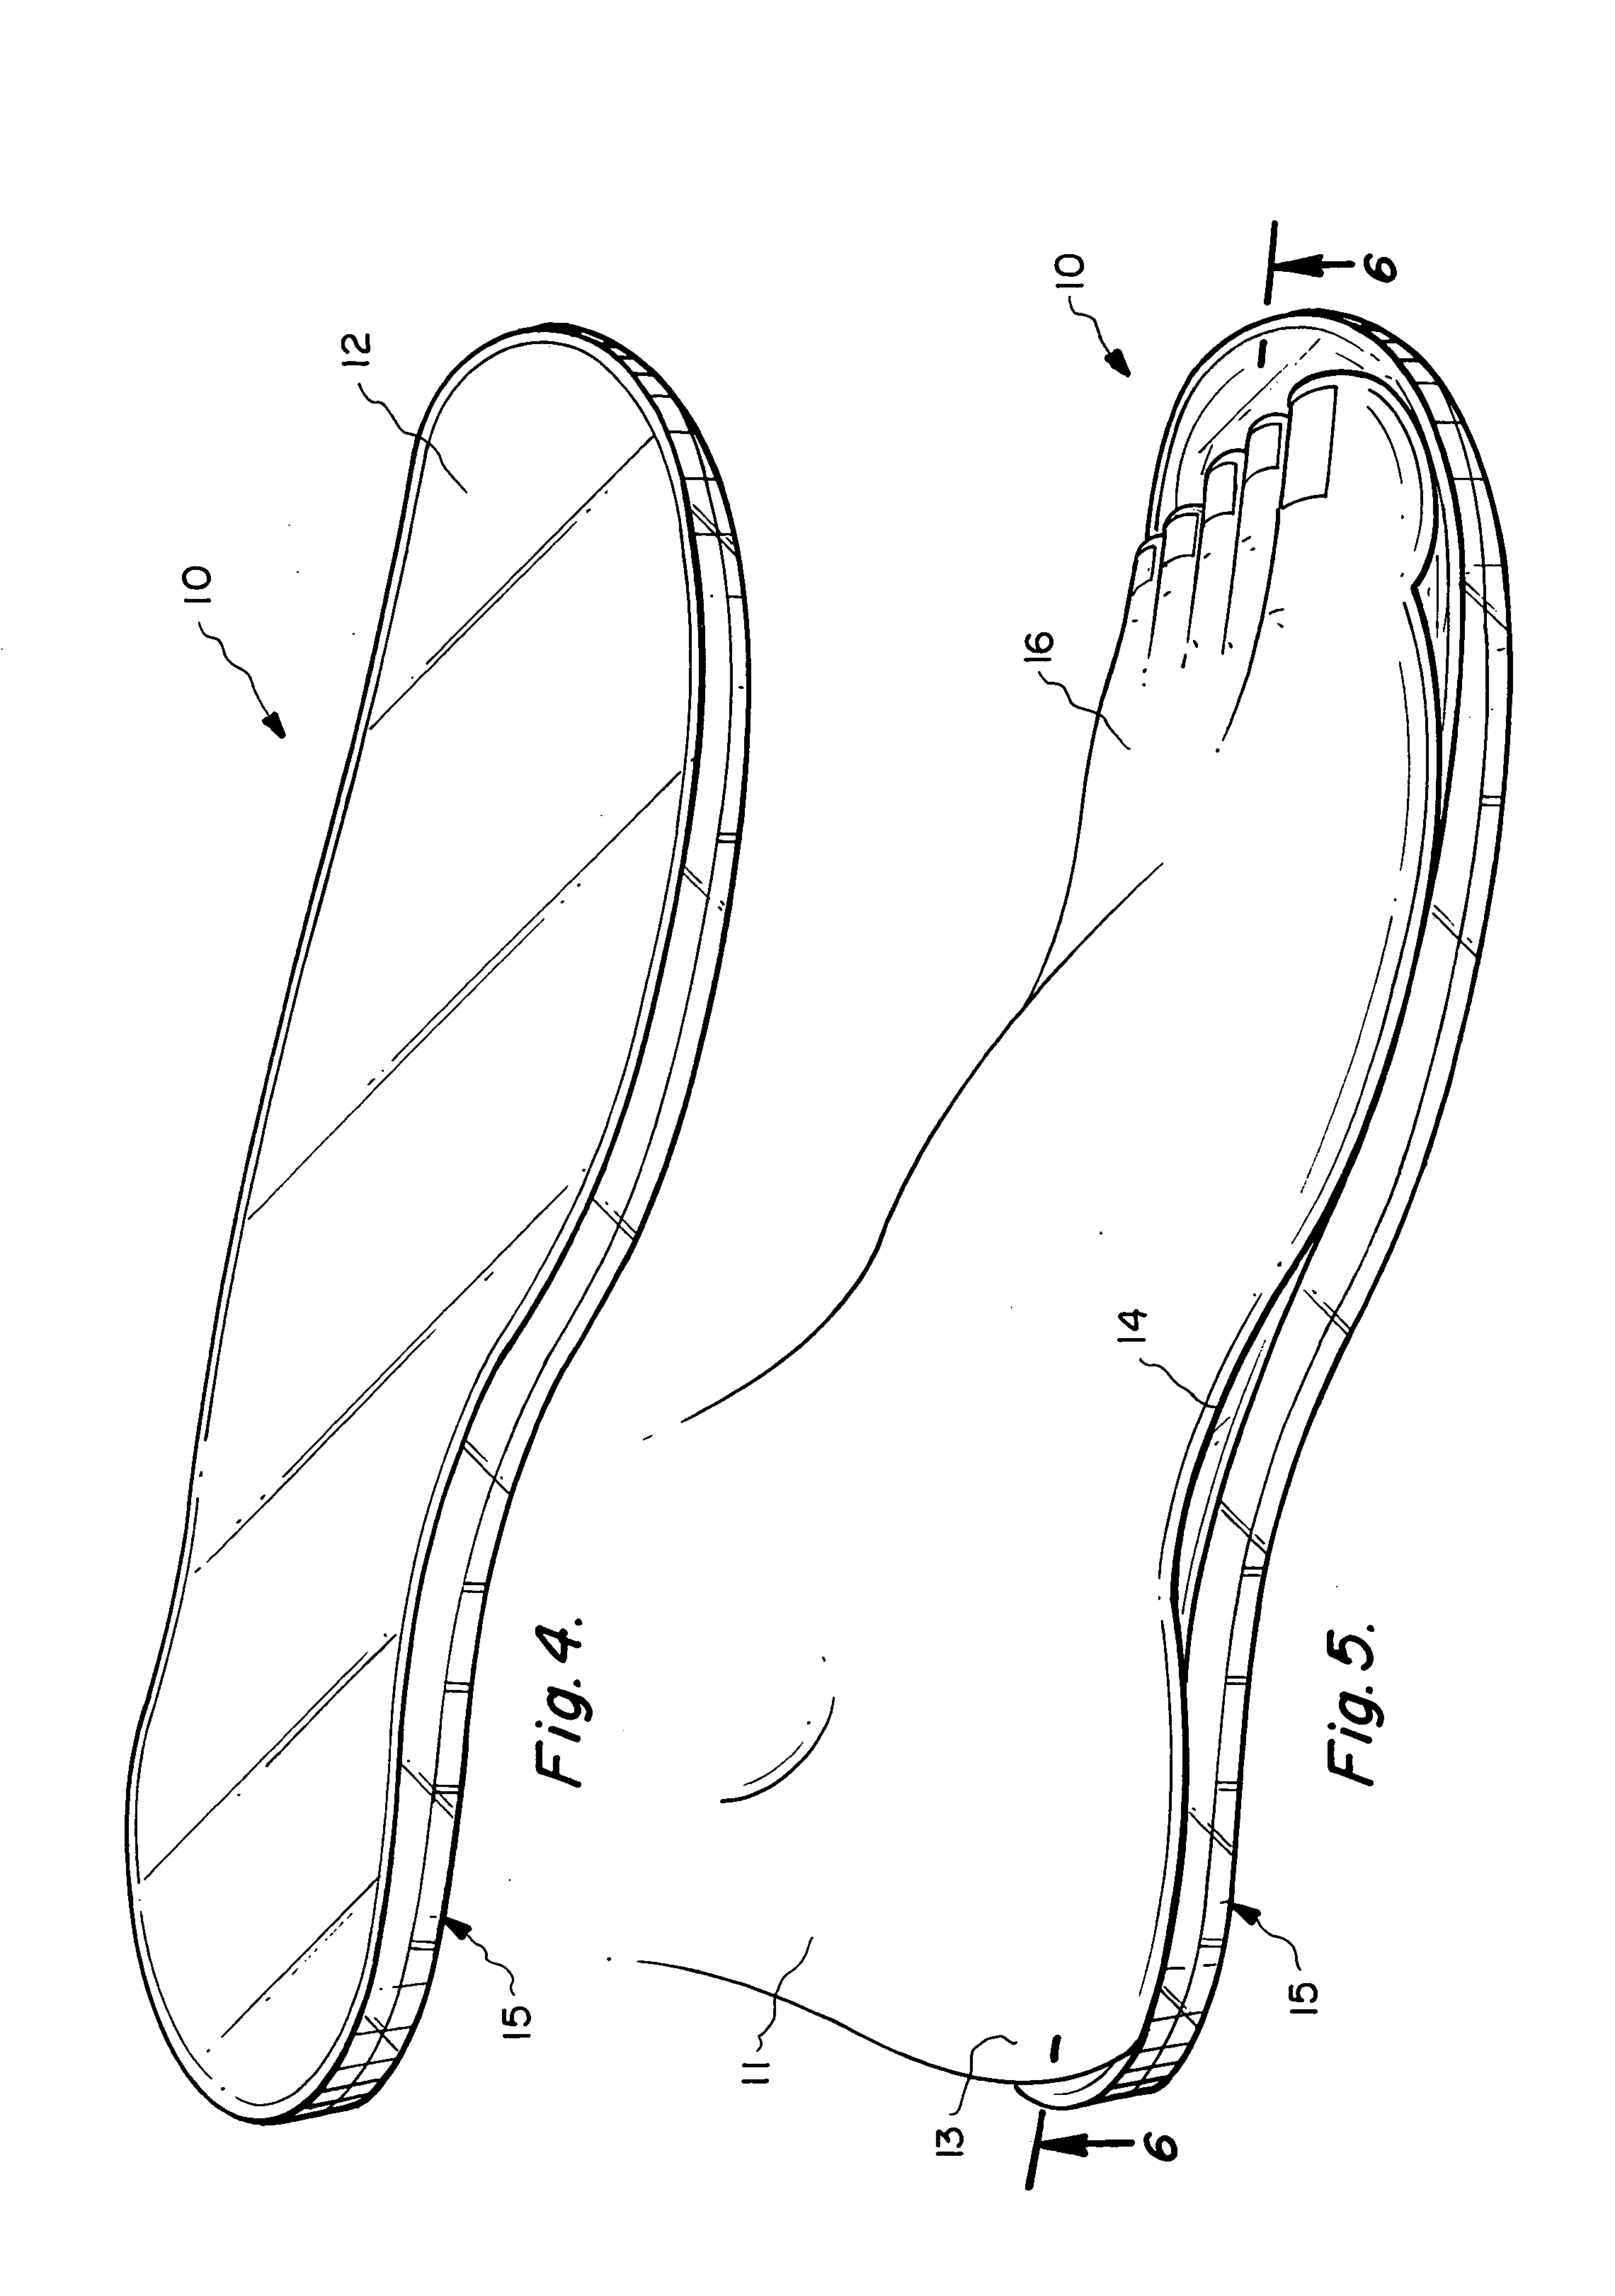 Footwear inserts, including midsoles, sockliners, footbeds and/or upper components using granular ethyl vinyl acetate (EVA) and method of manufacture